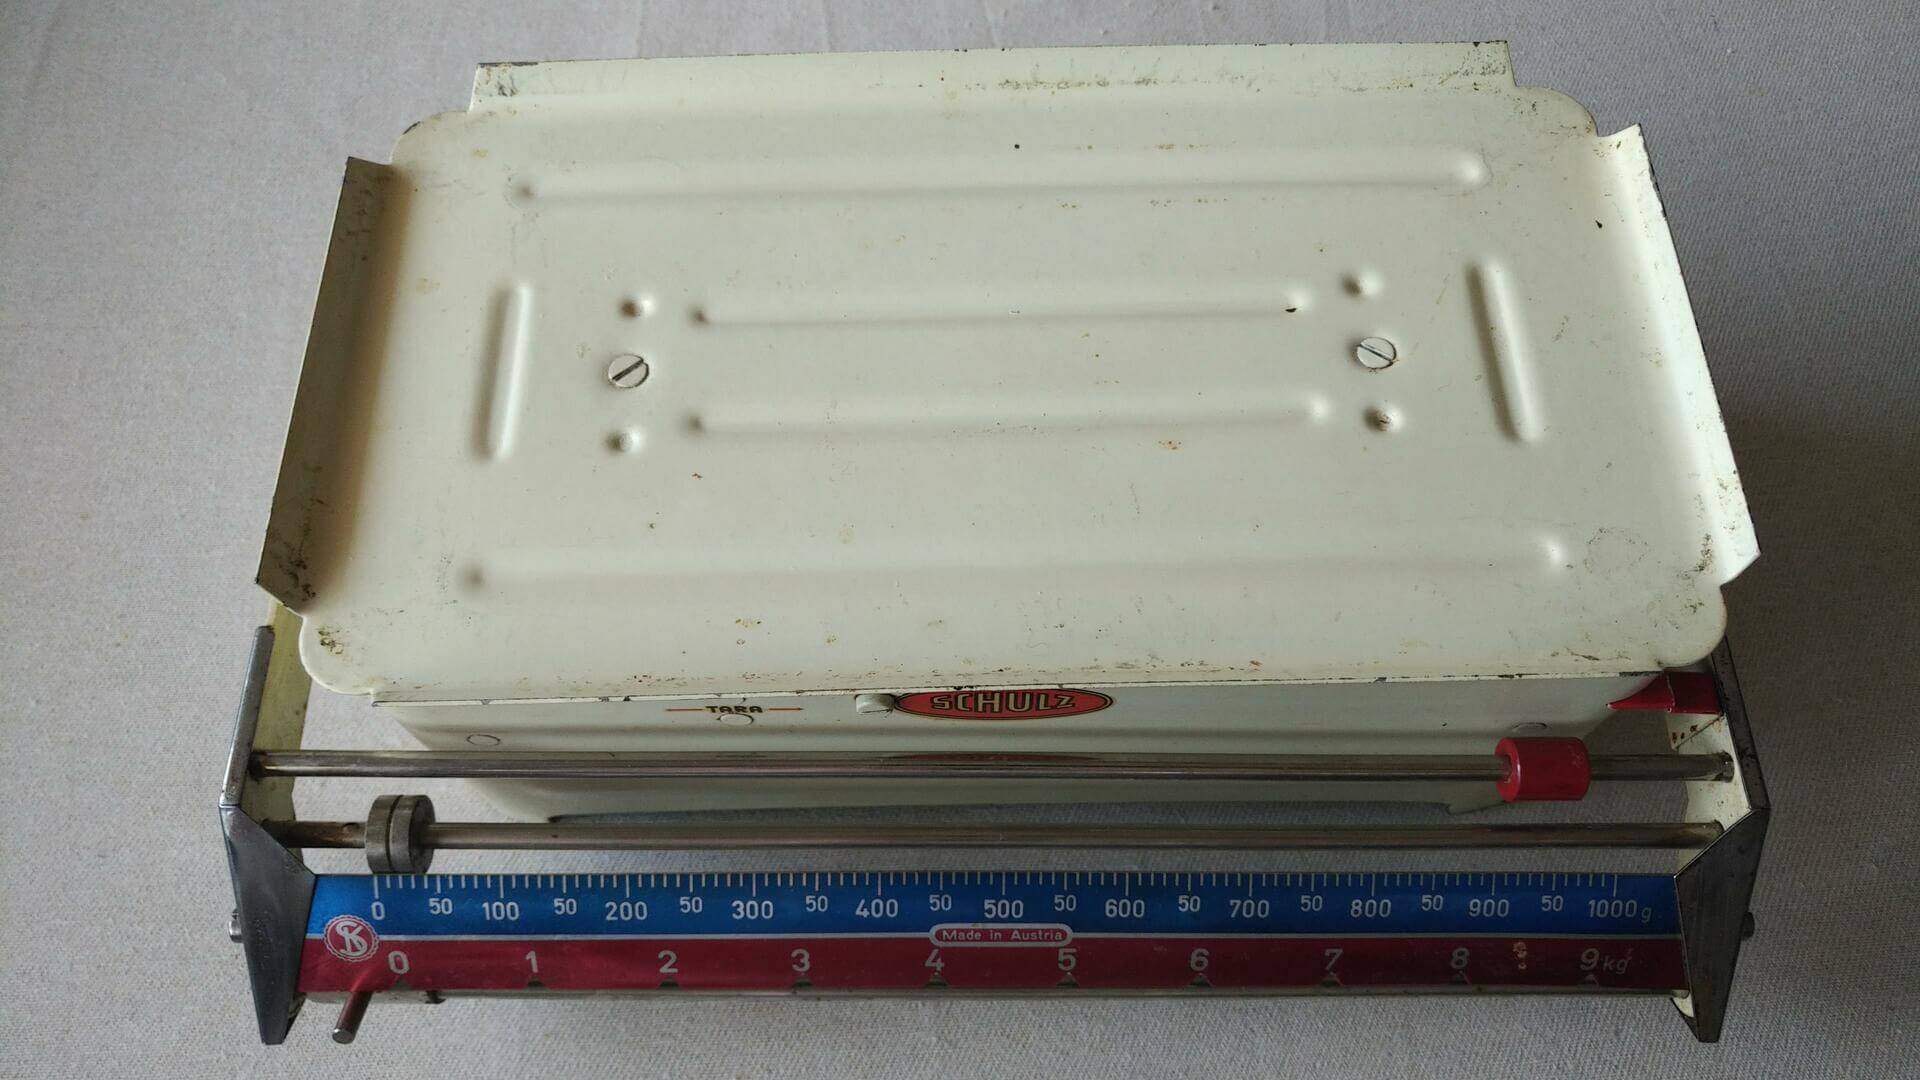 Rare vintage mechanic kitchen balance scale by Schulz Karl Wein. Antique made in Austria collectible weight measuring tools and gadgets